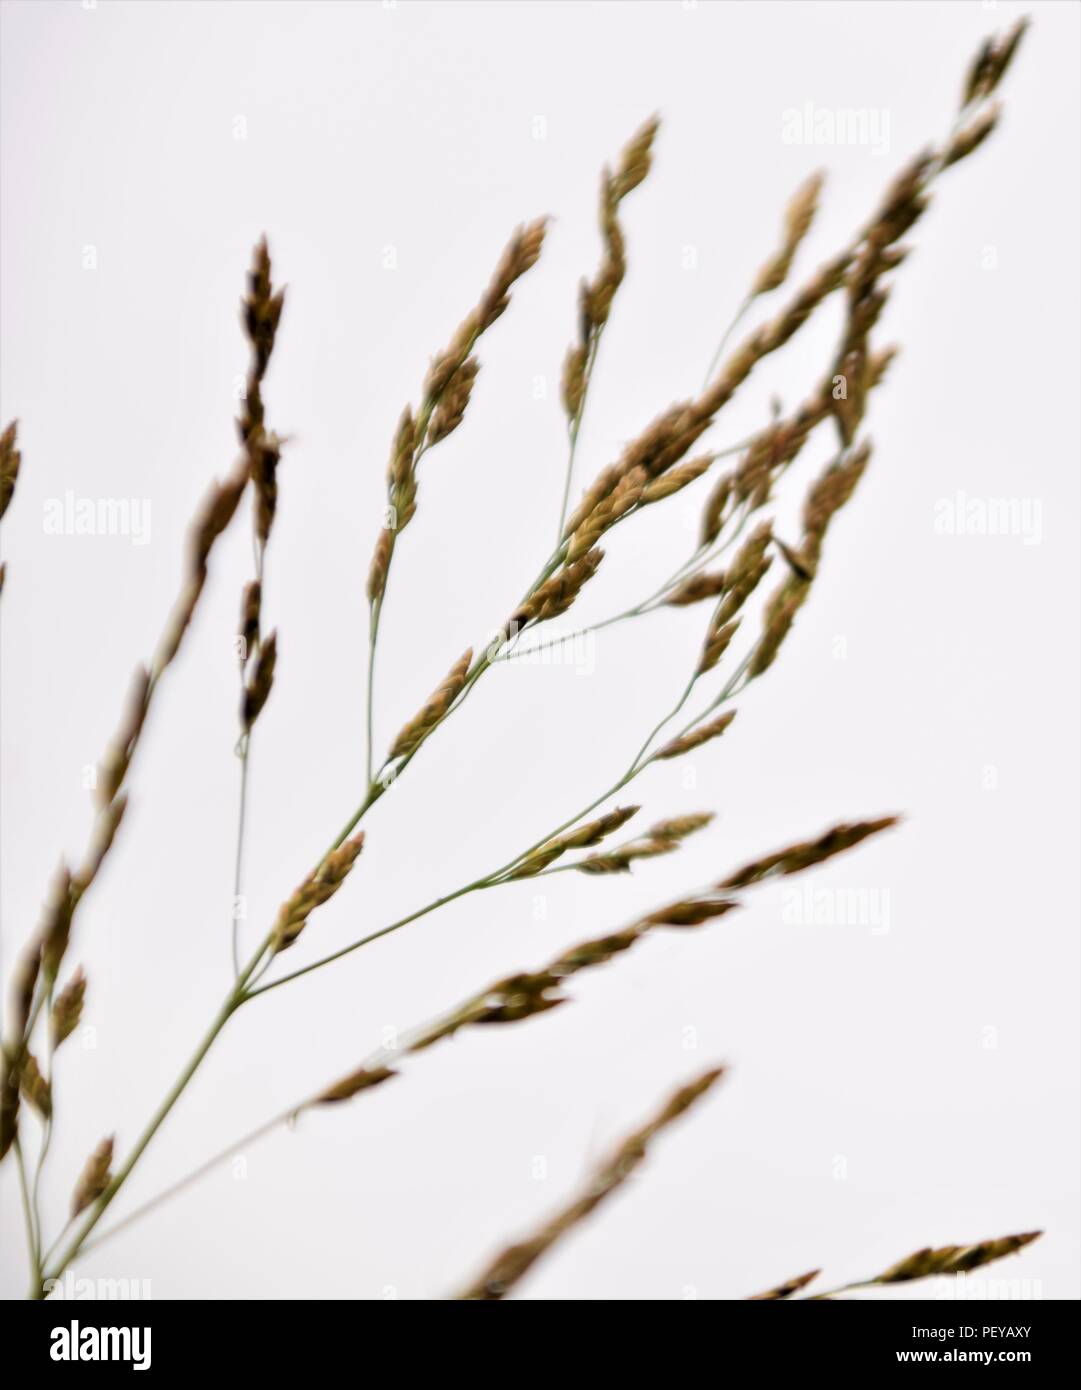 Wild grass silhouette selective focus blurred background Stock Photo